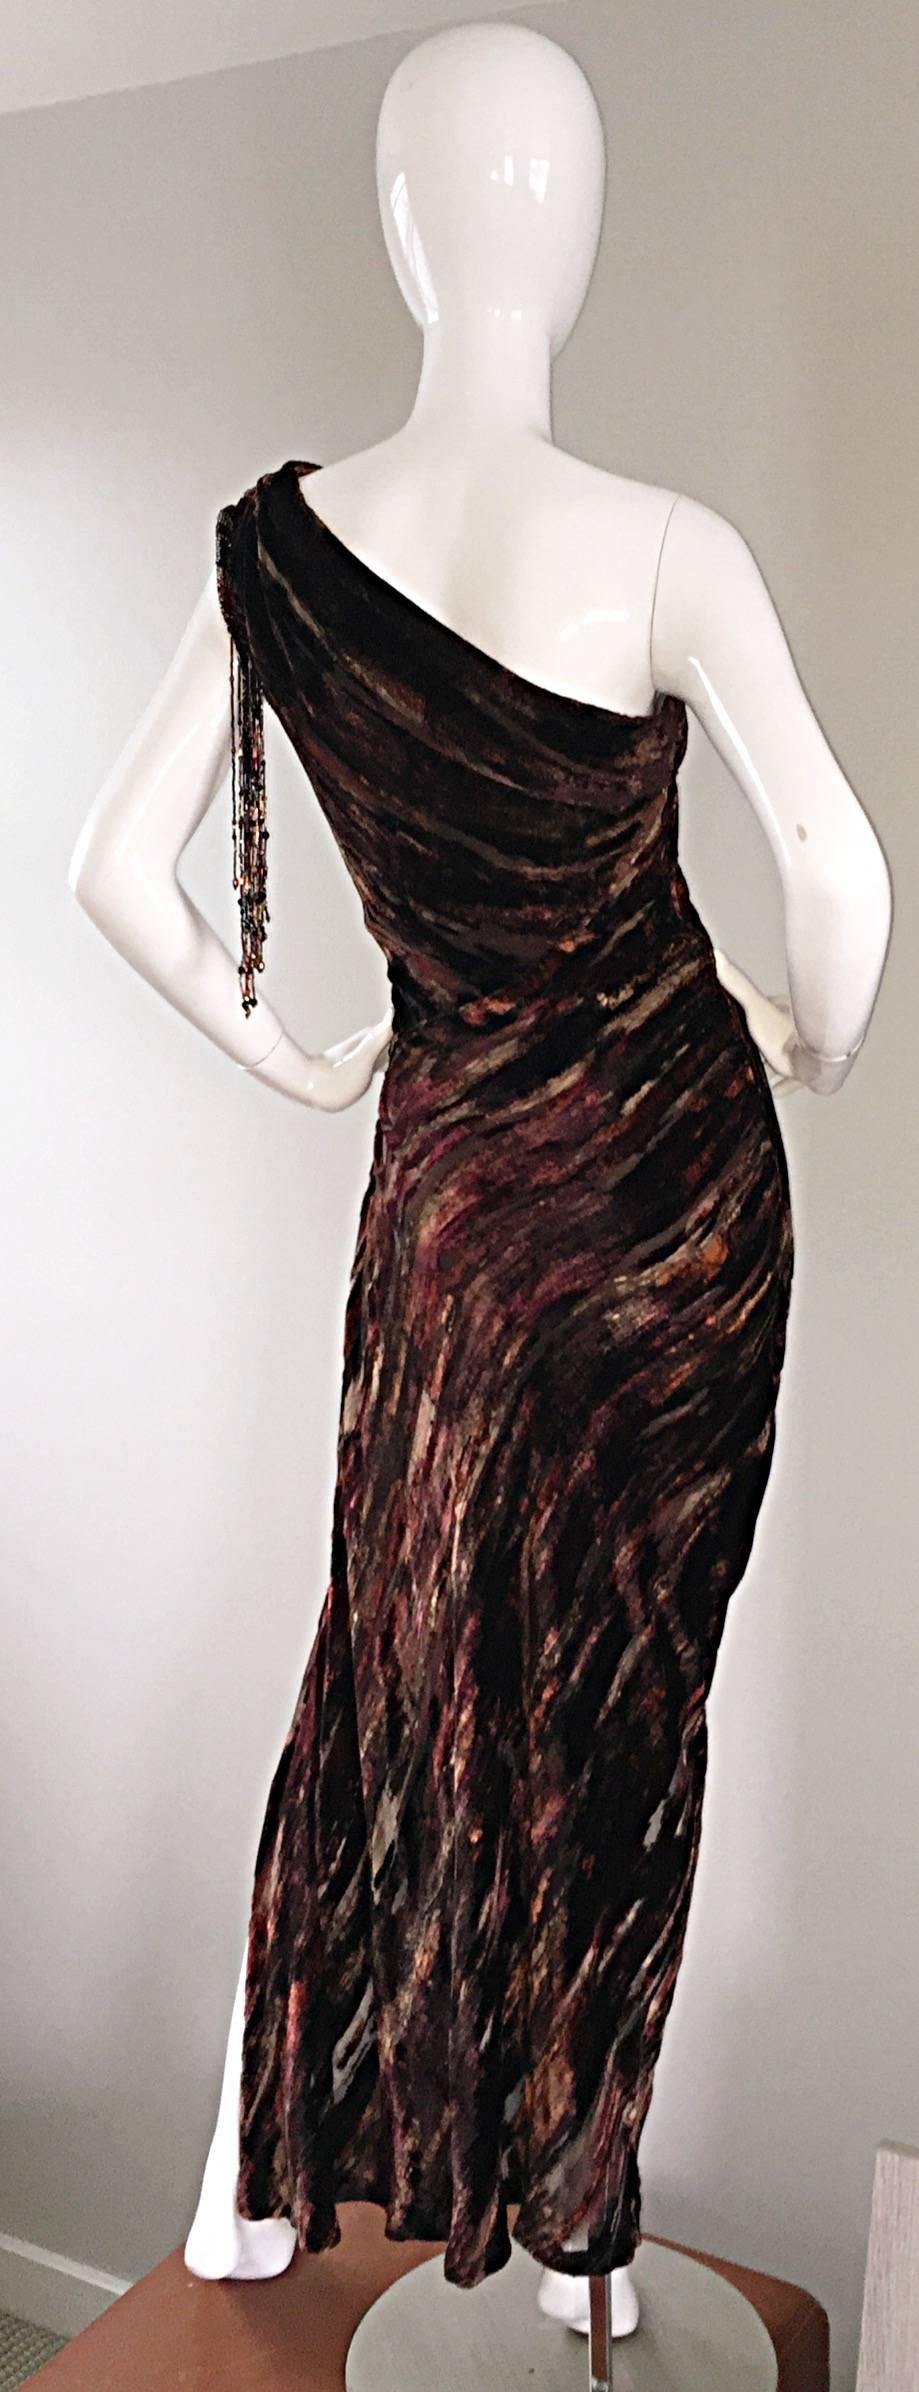 Extraordinary vintage Bob Mackie one shoulder burnt-out silk velvet gown! Couture quality, with a heavy amount of attention paid to detail. Autumnal colors of burgundy, wine, and tans. Hand-sen beads at arm hole, and multiples that dangle from the